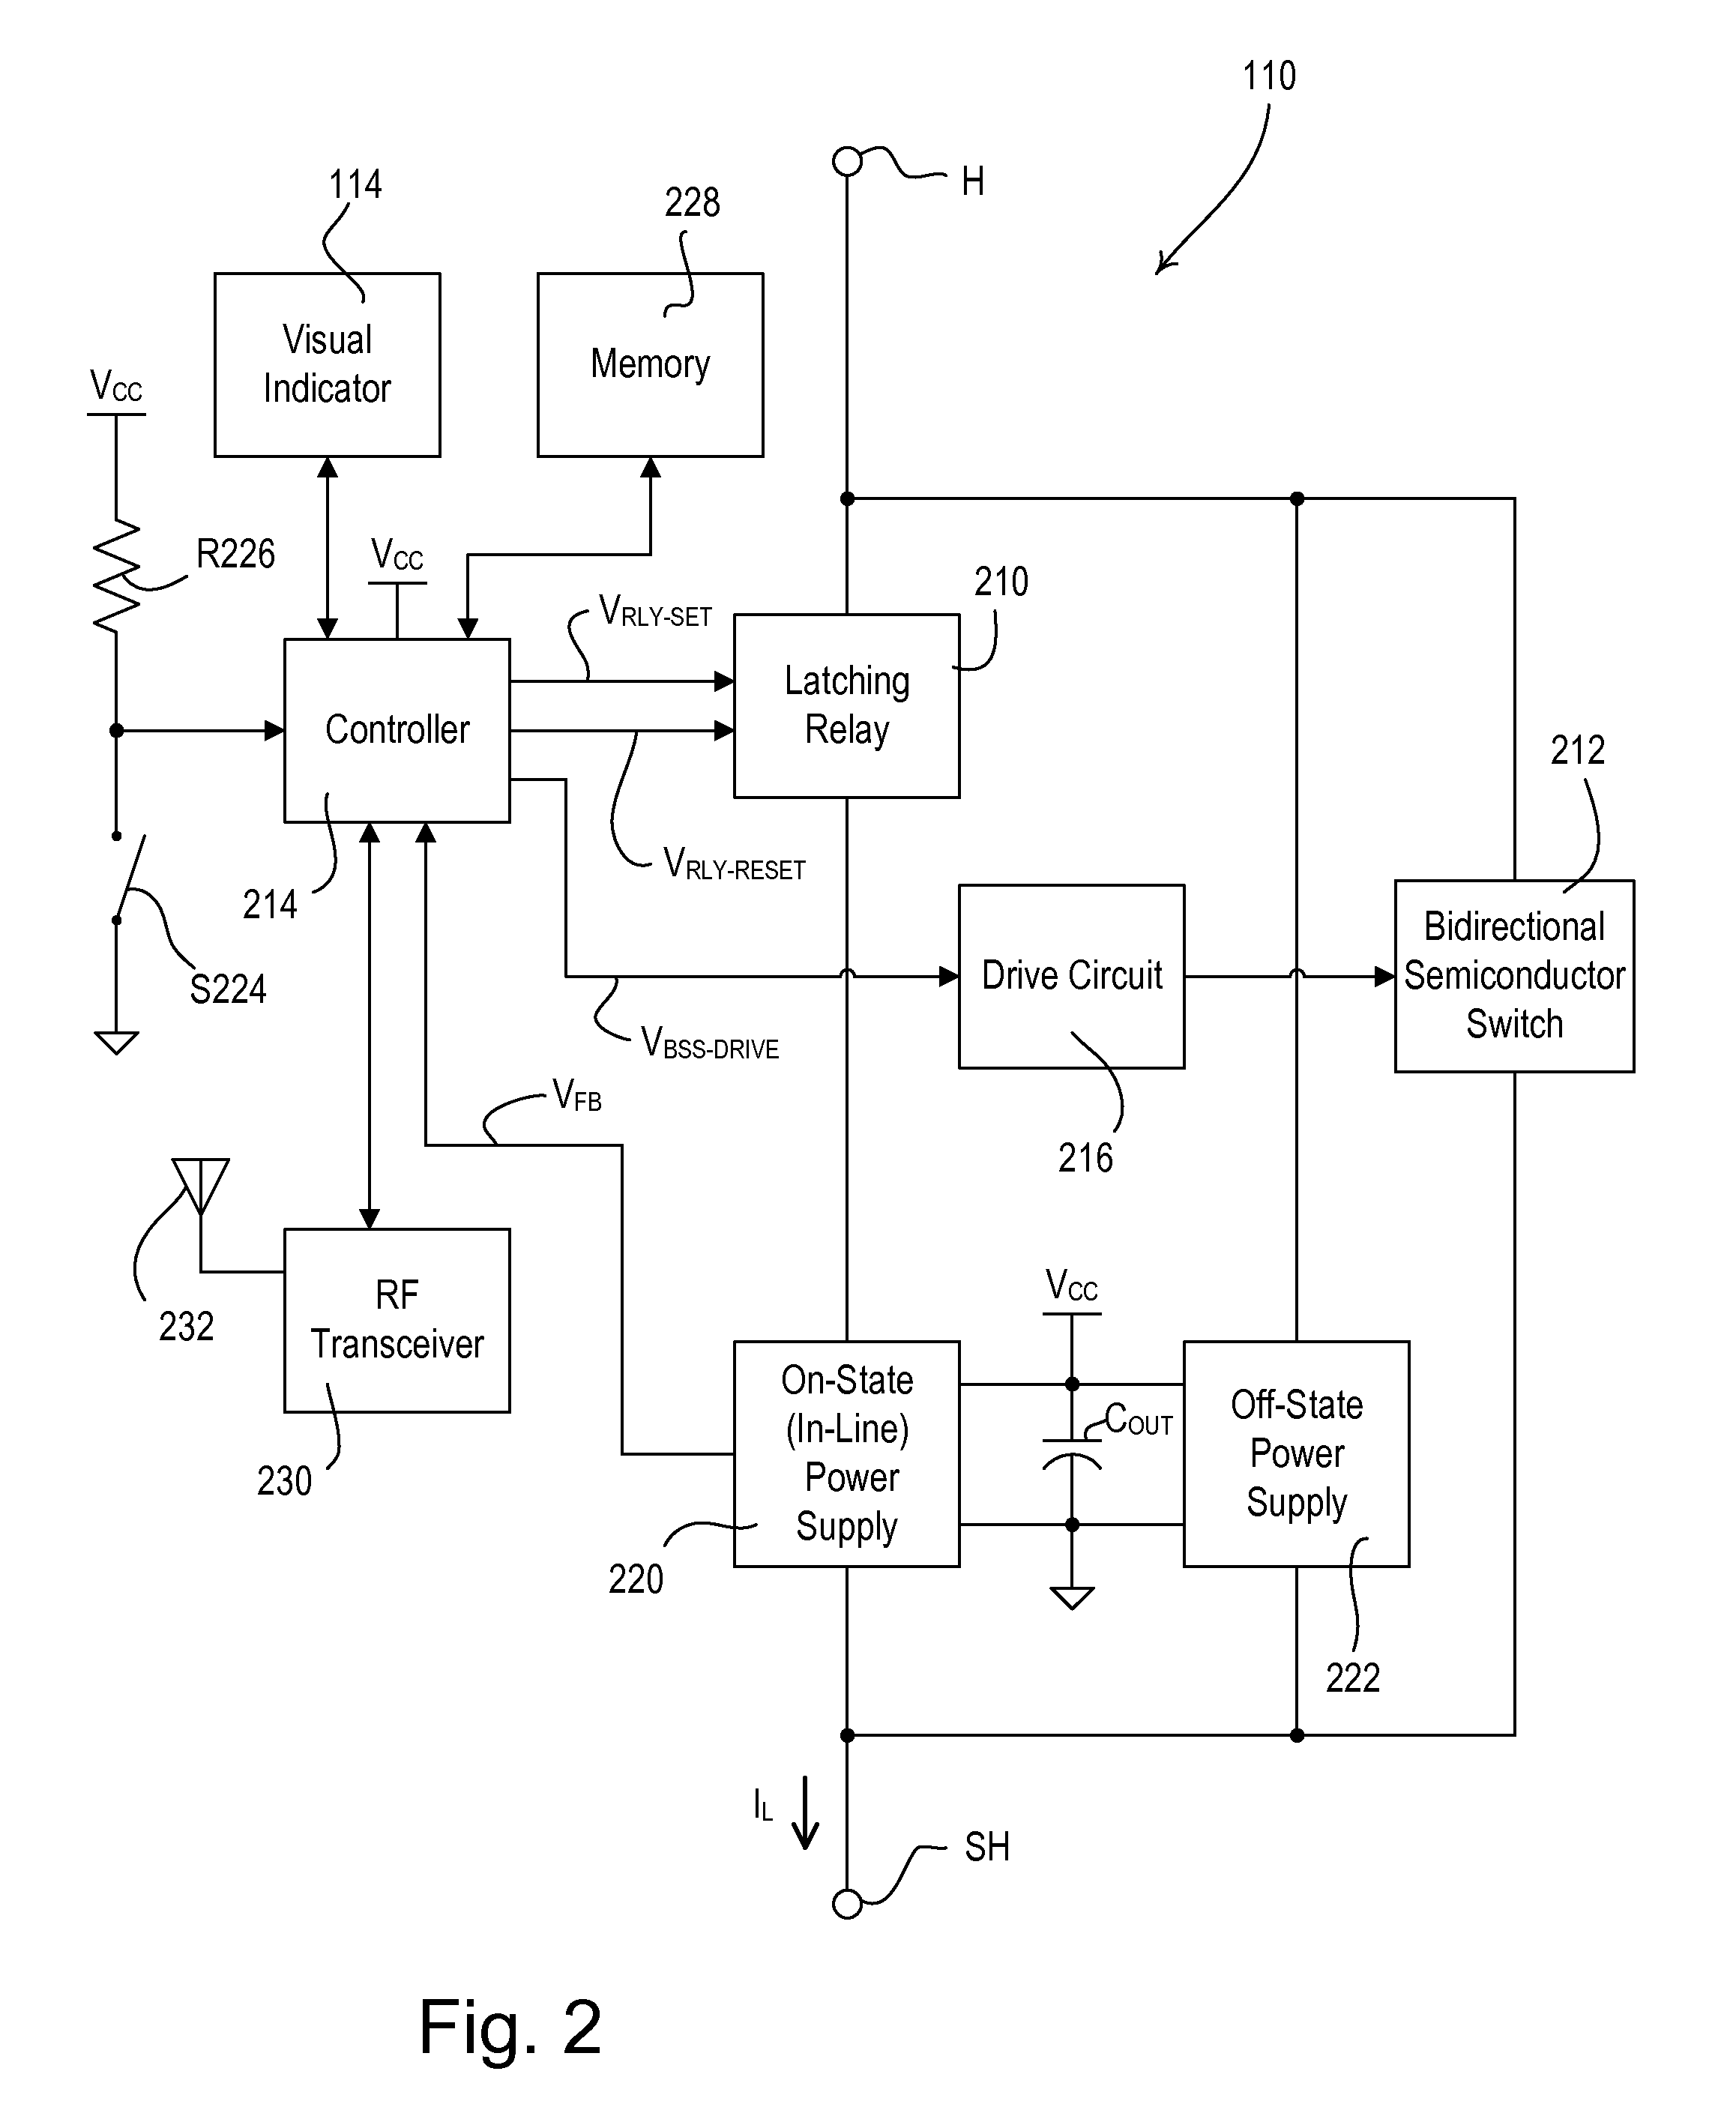 Smart Electronic Switch for Low-Power Loads